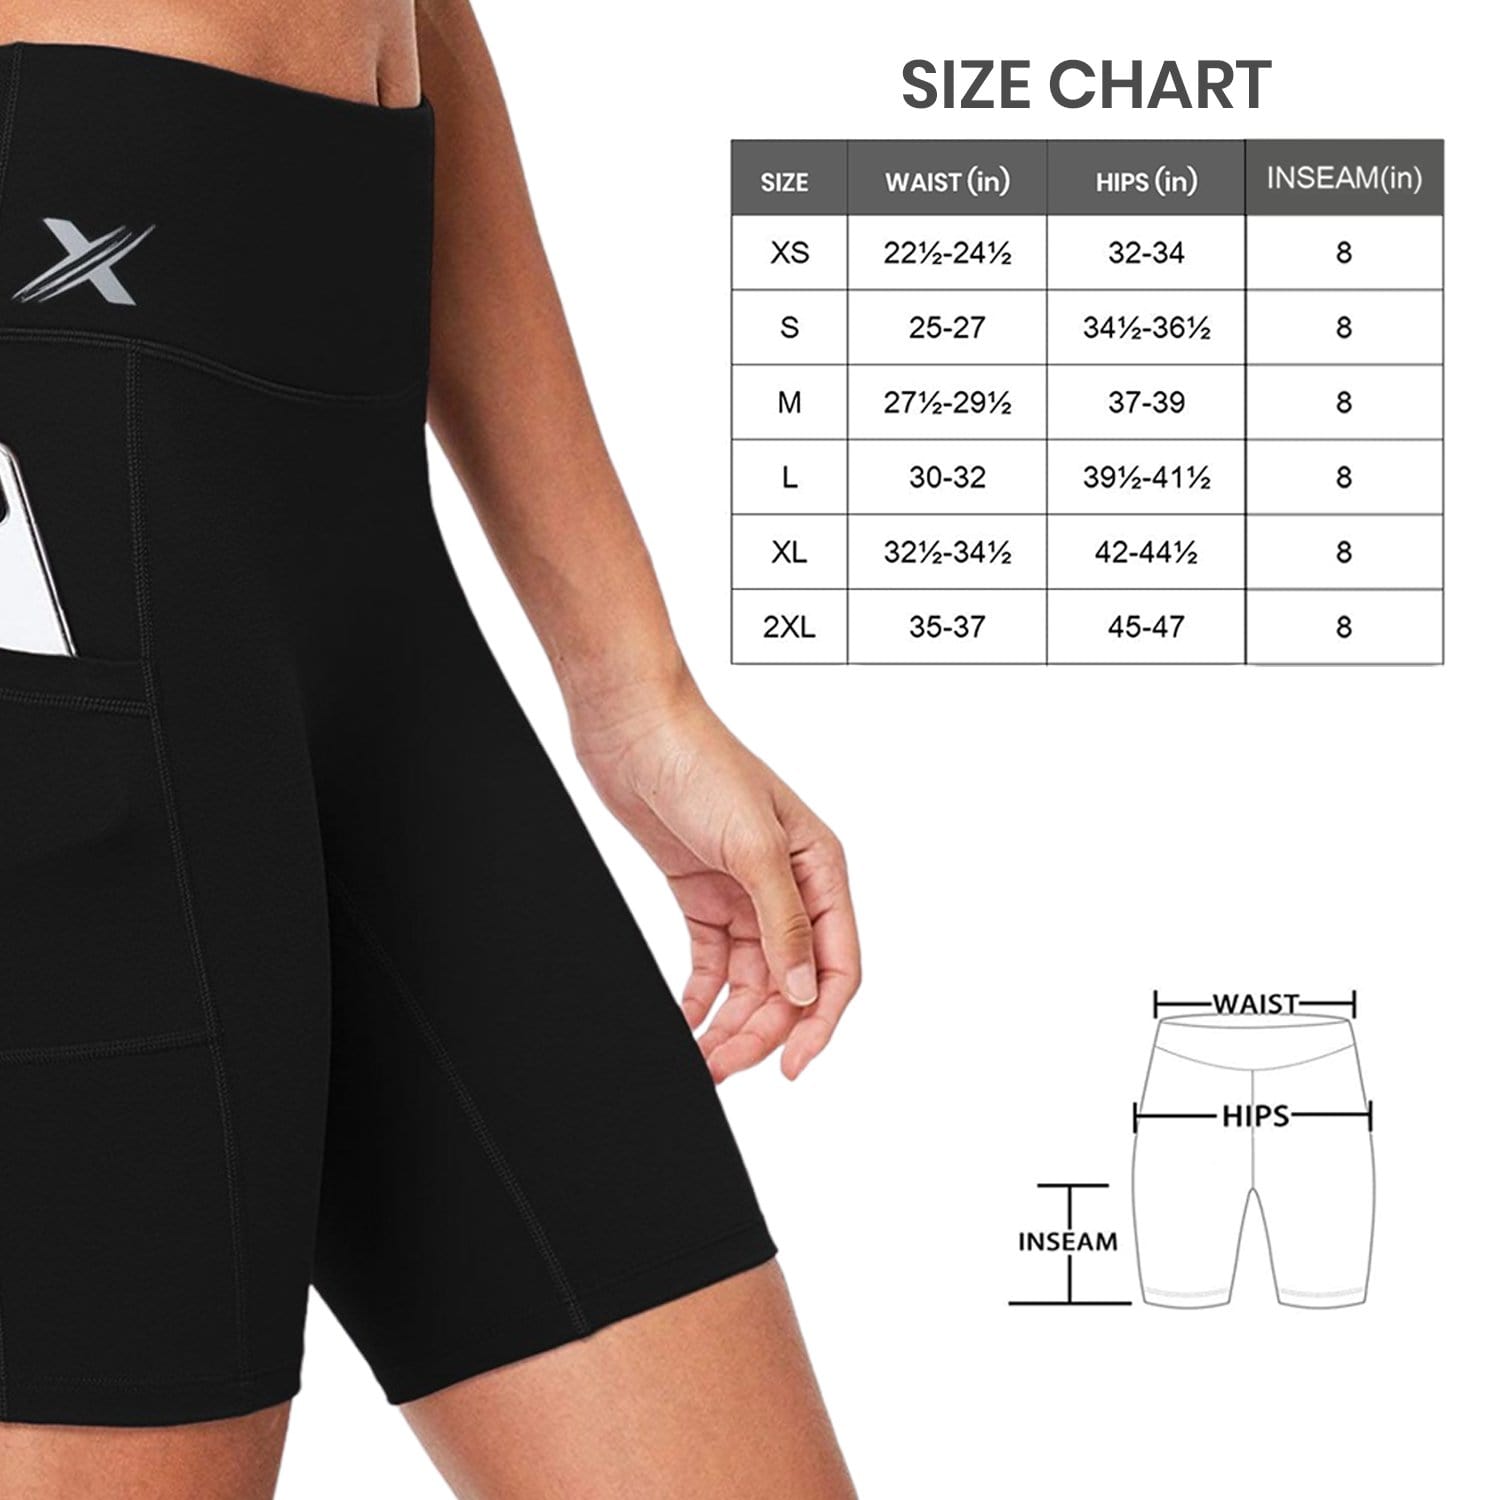 LuLu BURNING High Waisted So Perfect Yoga Shorts Buttery Soft Stretchy  Biker Workout Legging For Women 6 Inches From Ning07, $8.71